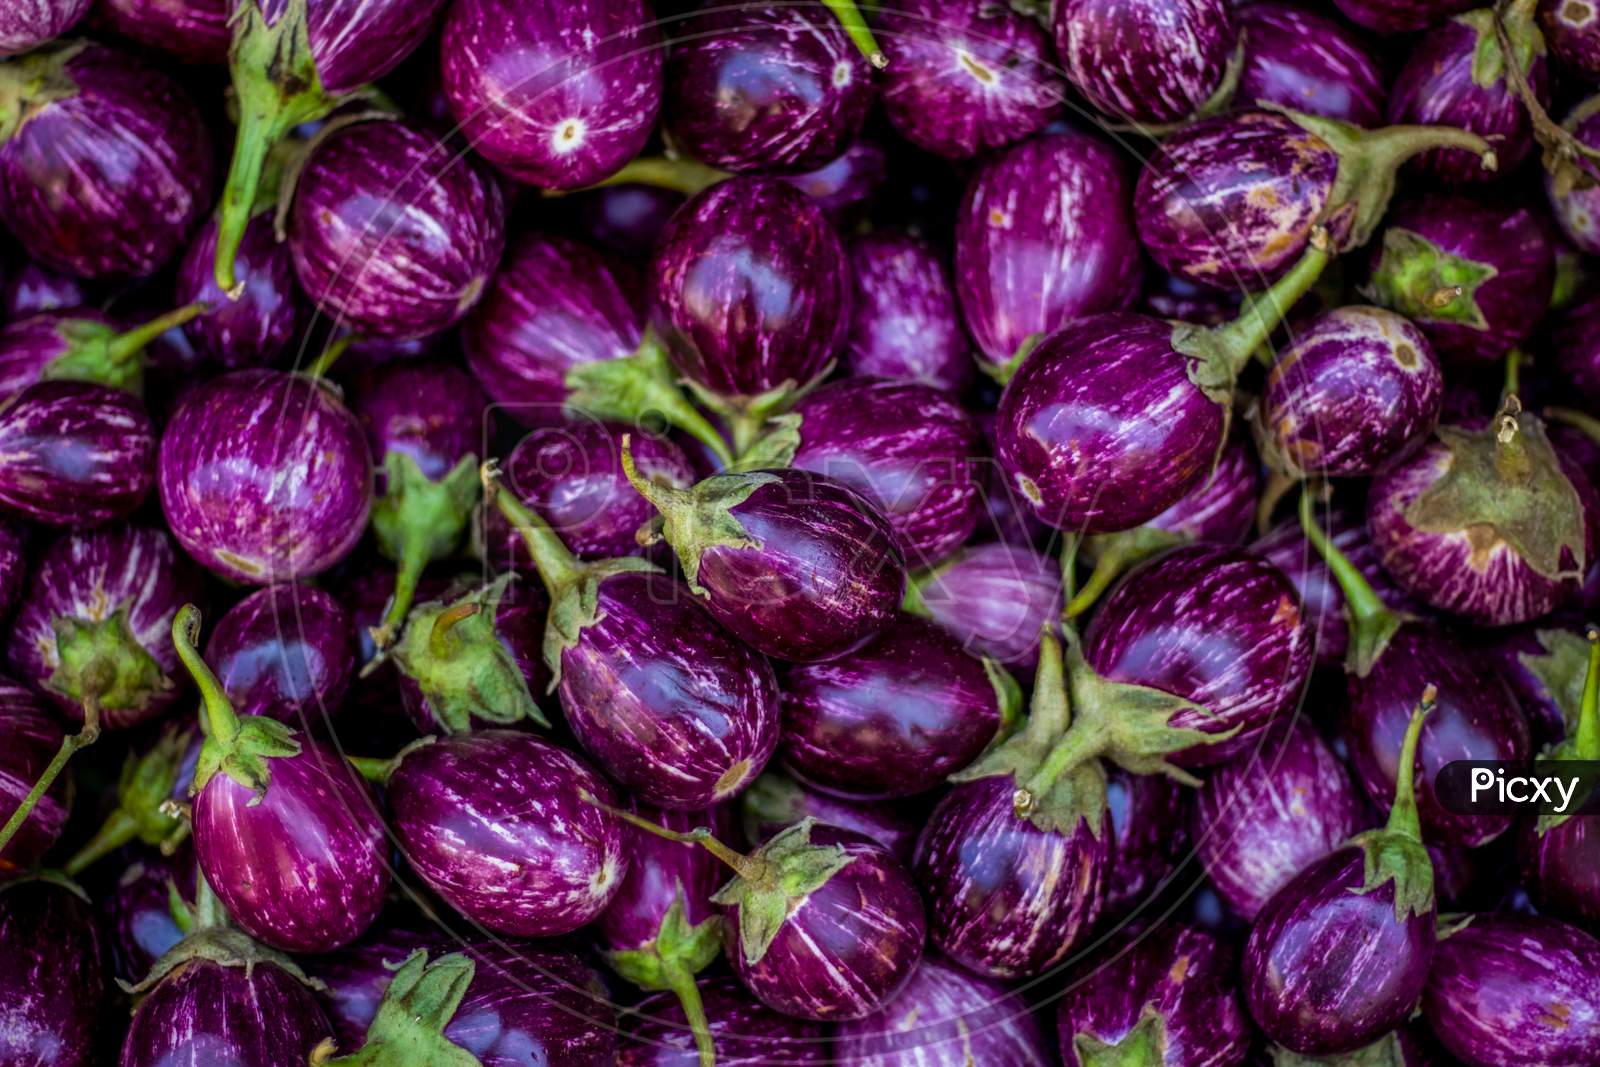 Top Down View Of A Heap Of Brinjals On Market The Name As Called Egg Fruit Aubergine Solanum Melongena For Sale In A Vegetable Market Overhead Composition And Top View Indian Street Market